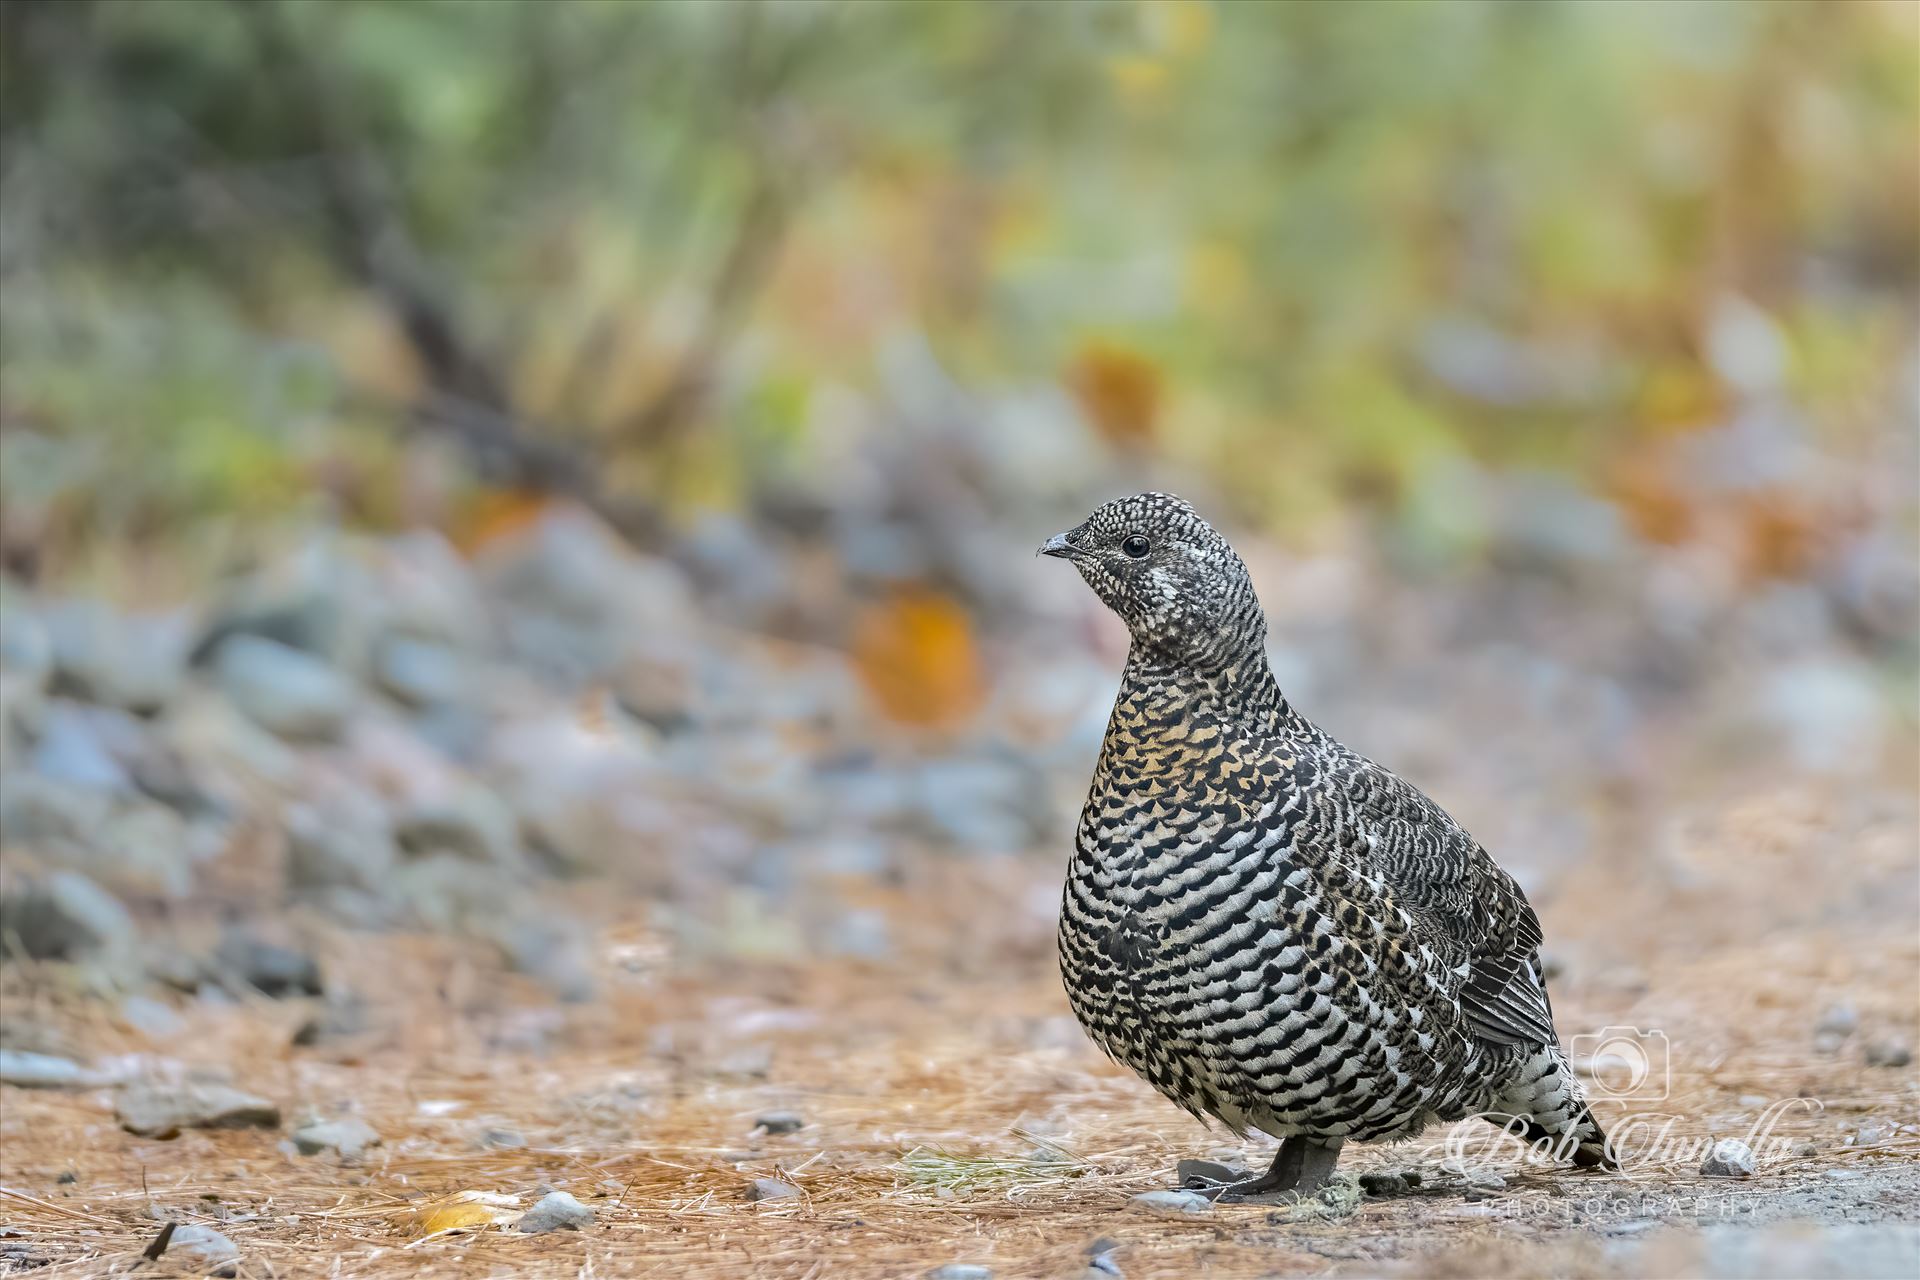 Female Spruce Grouse2 -  by Buckmaster